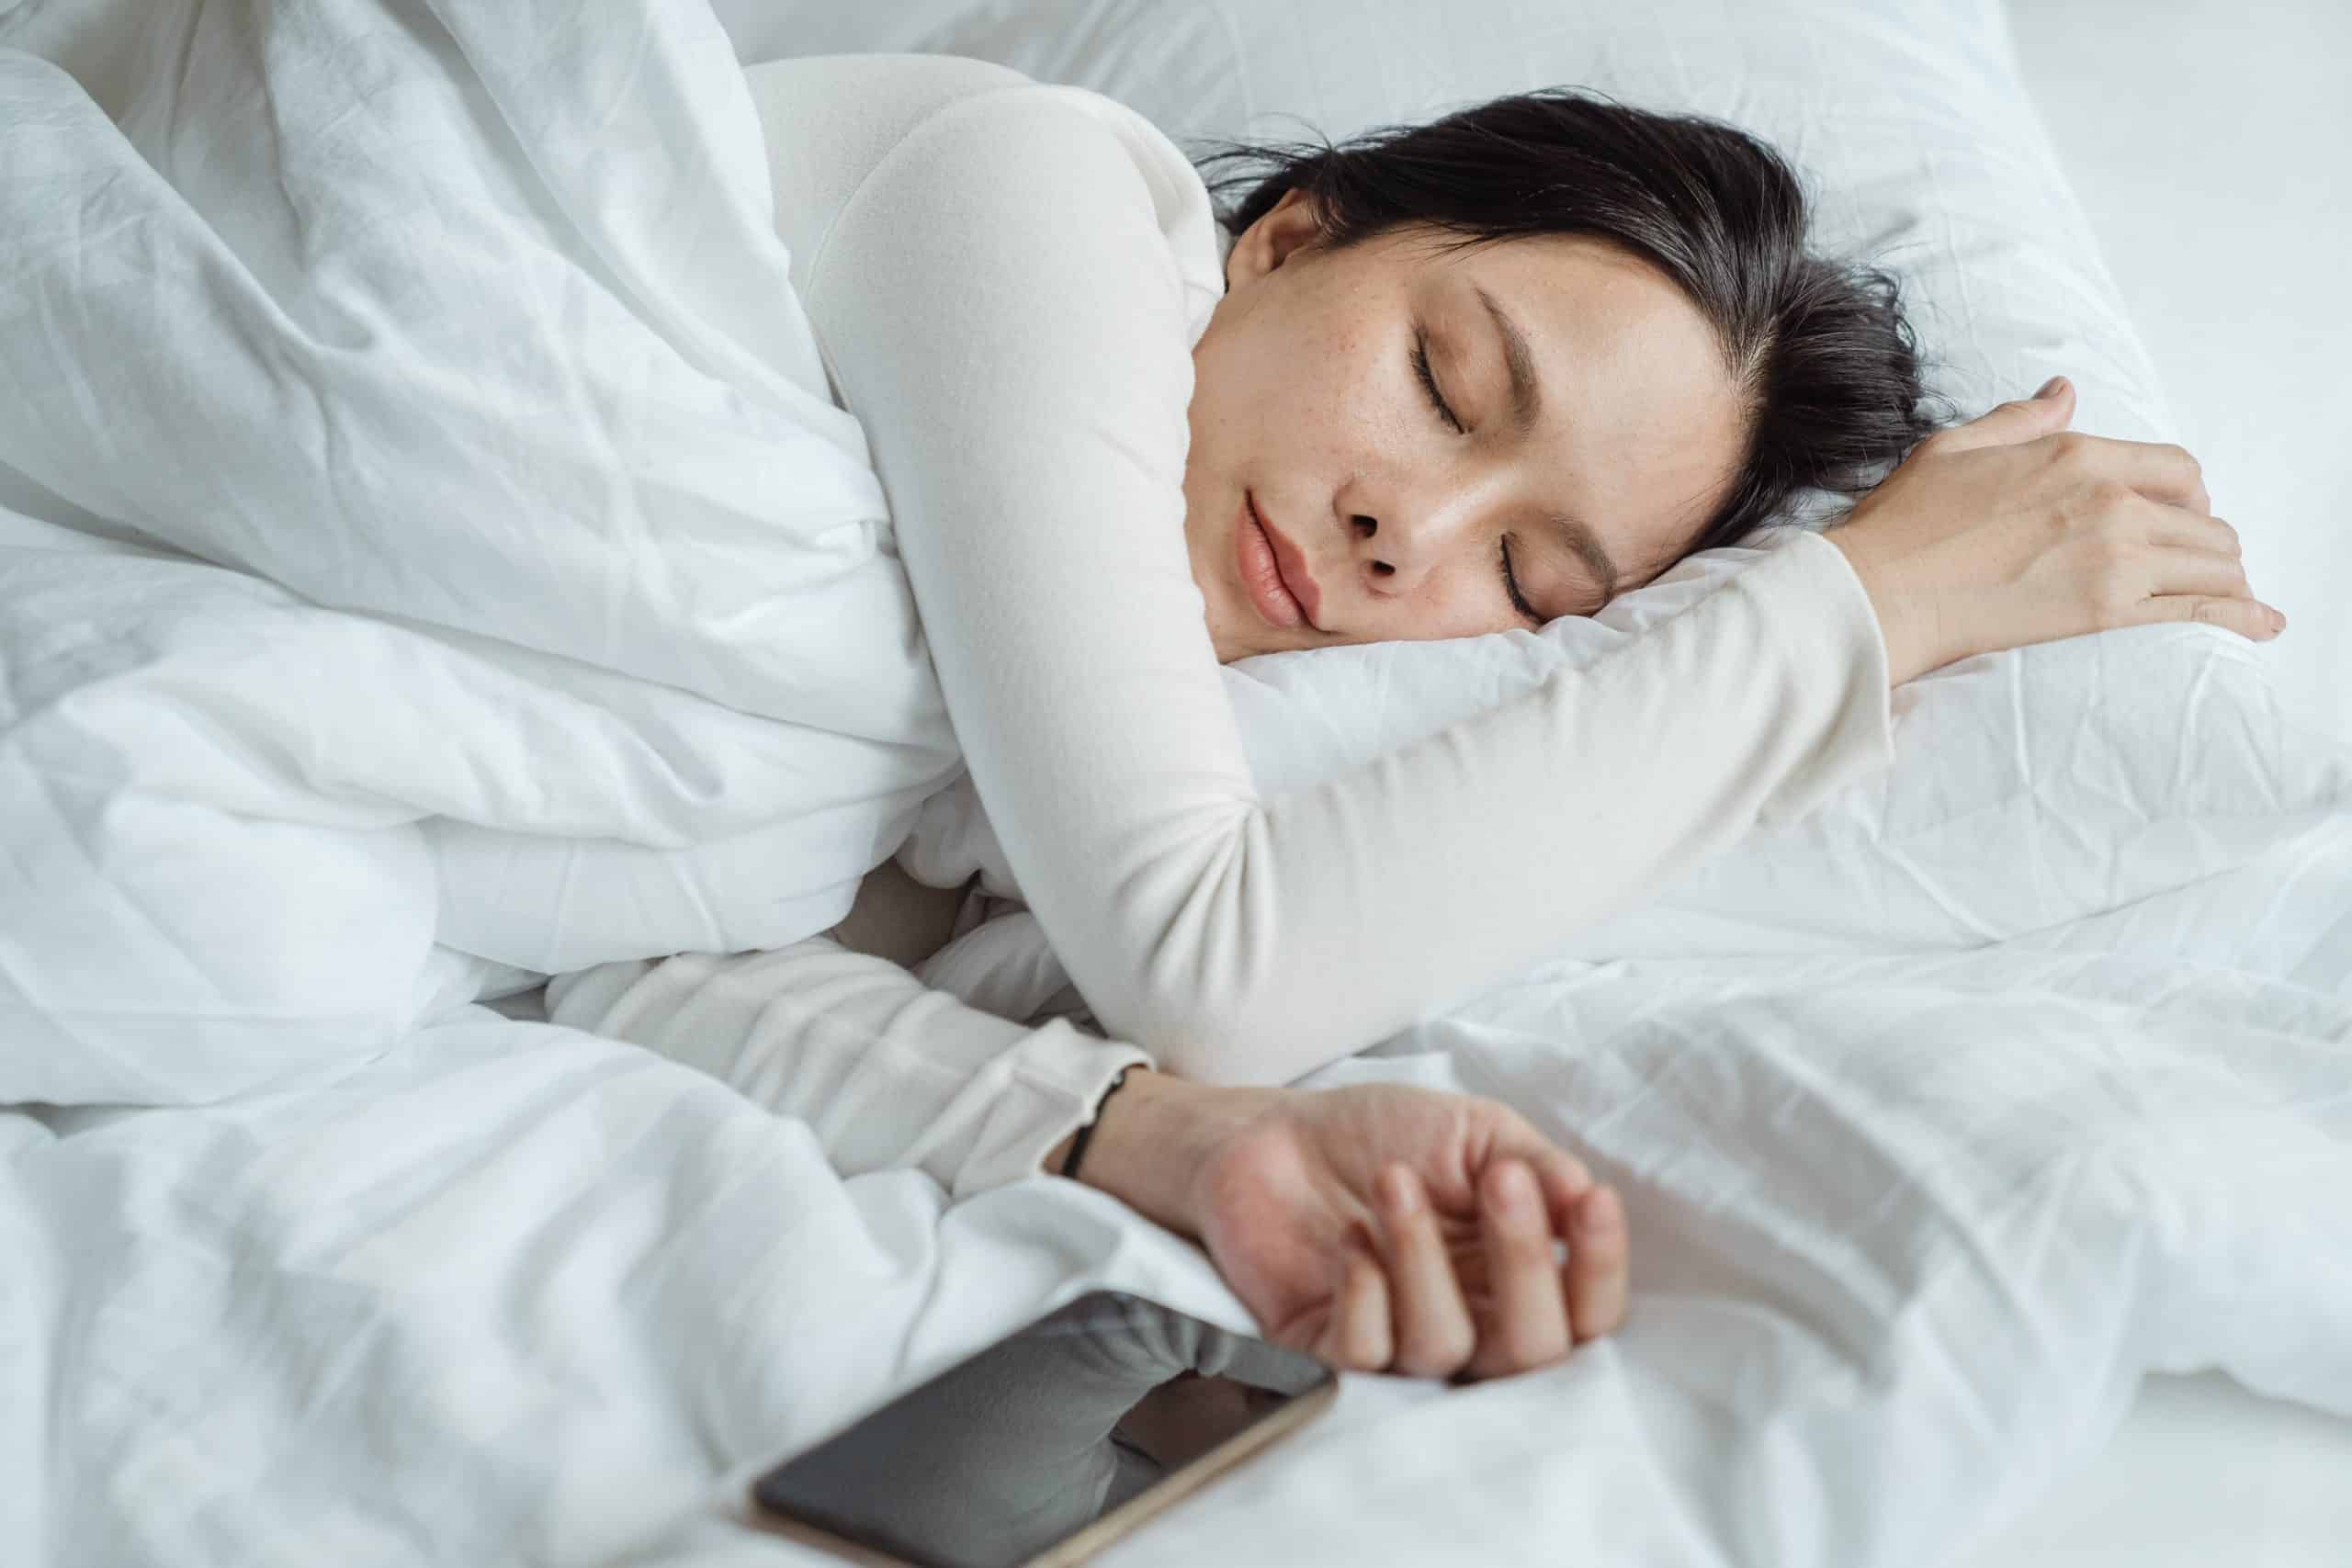 How to fall asleep quickly? 6 ways